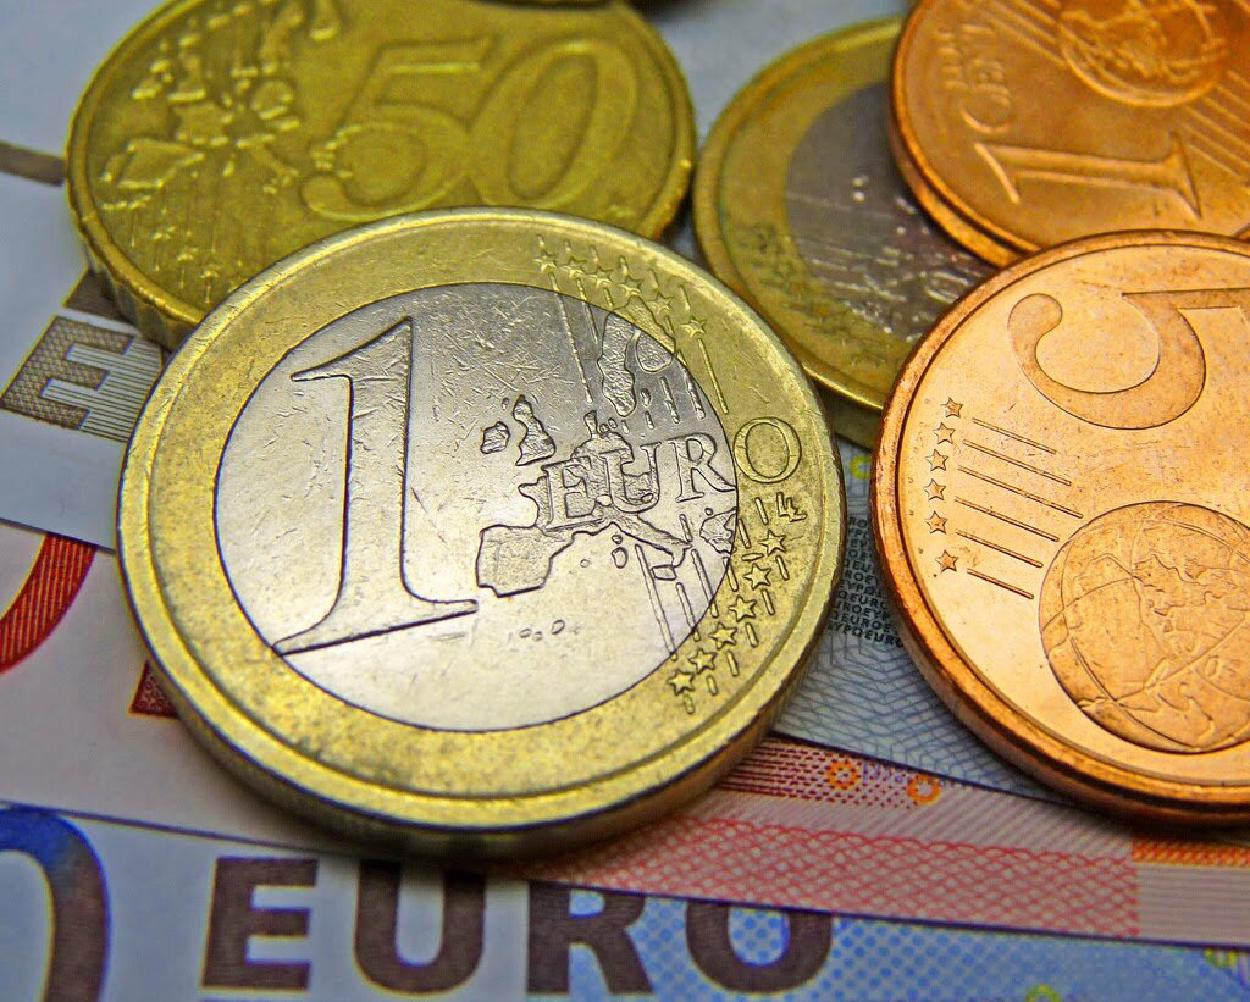 An image of the euro dollar